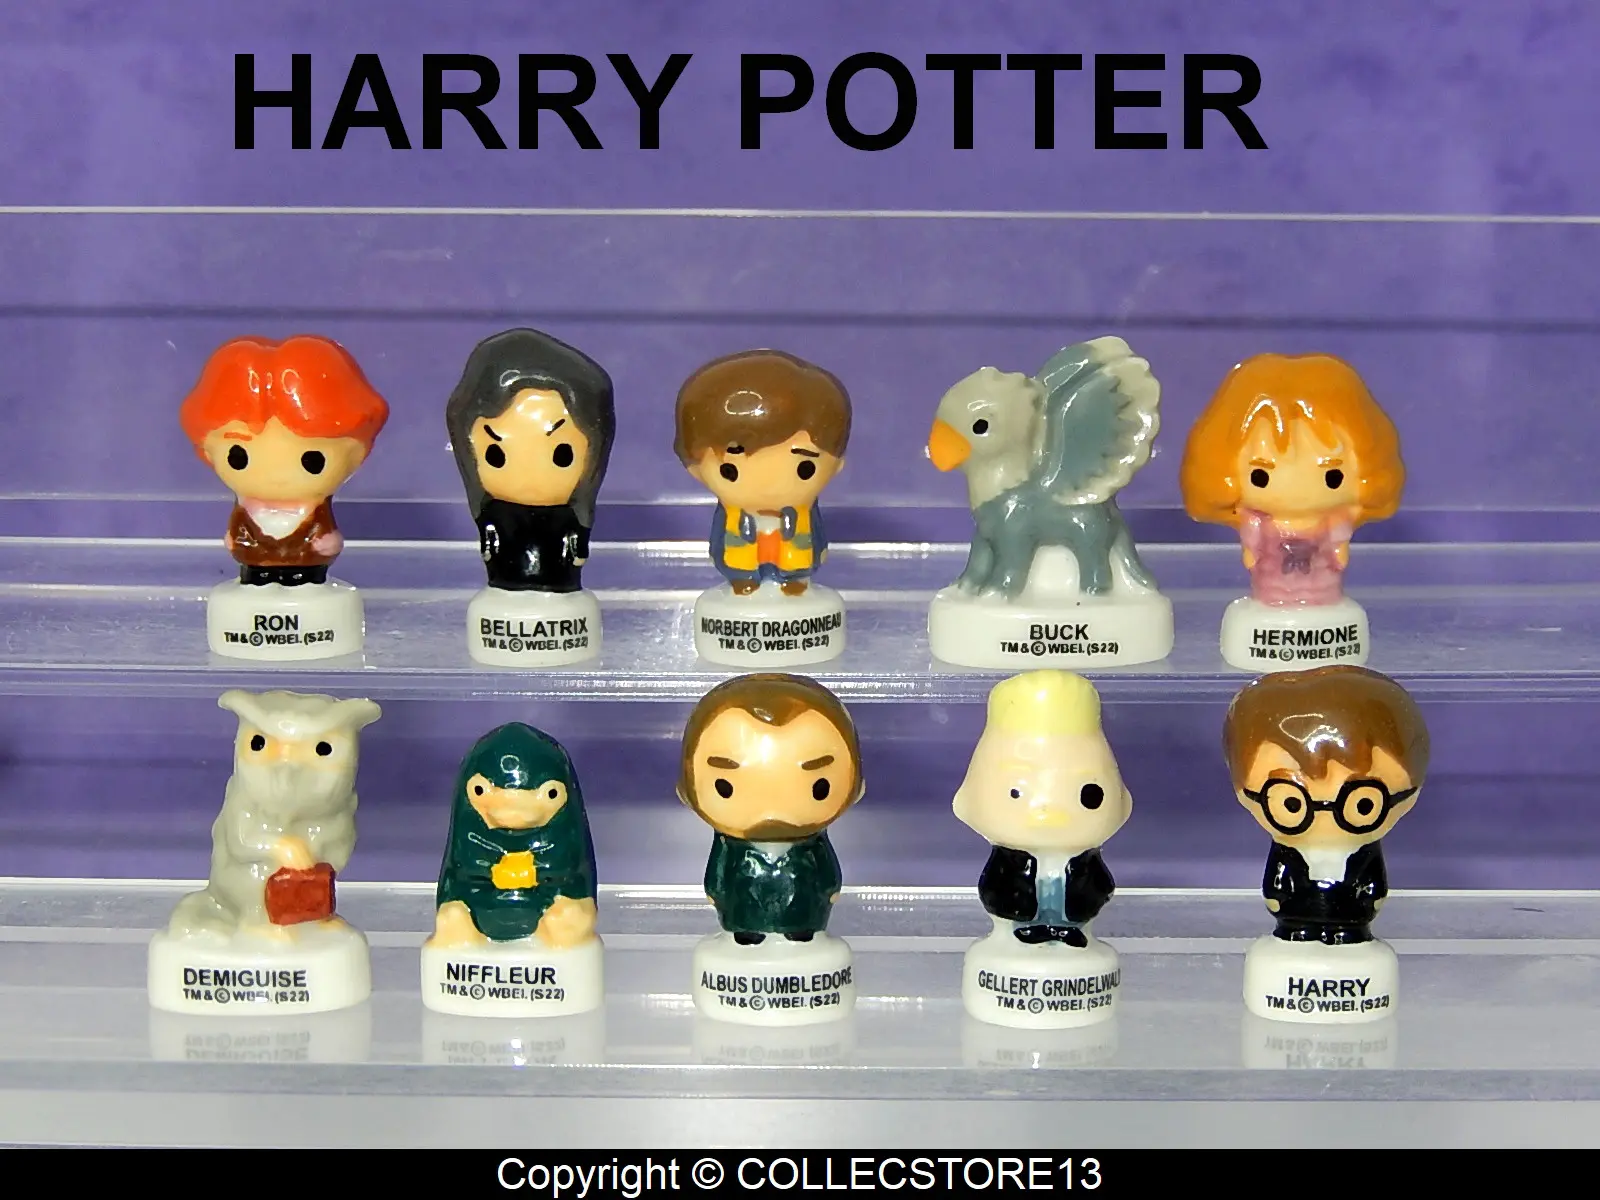 Harry Potter and Dumbledore of Harry Potter Feves figurines